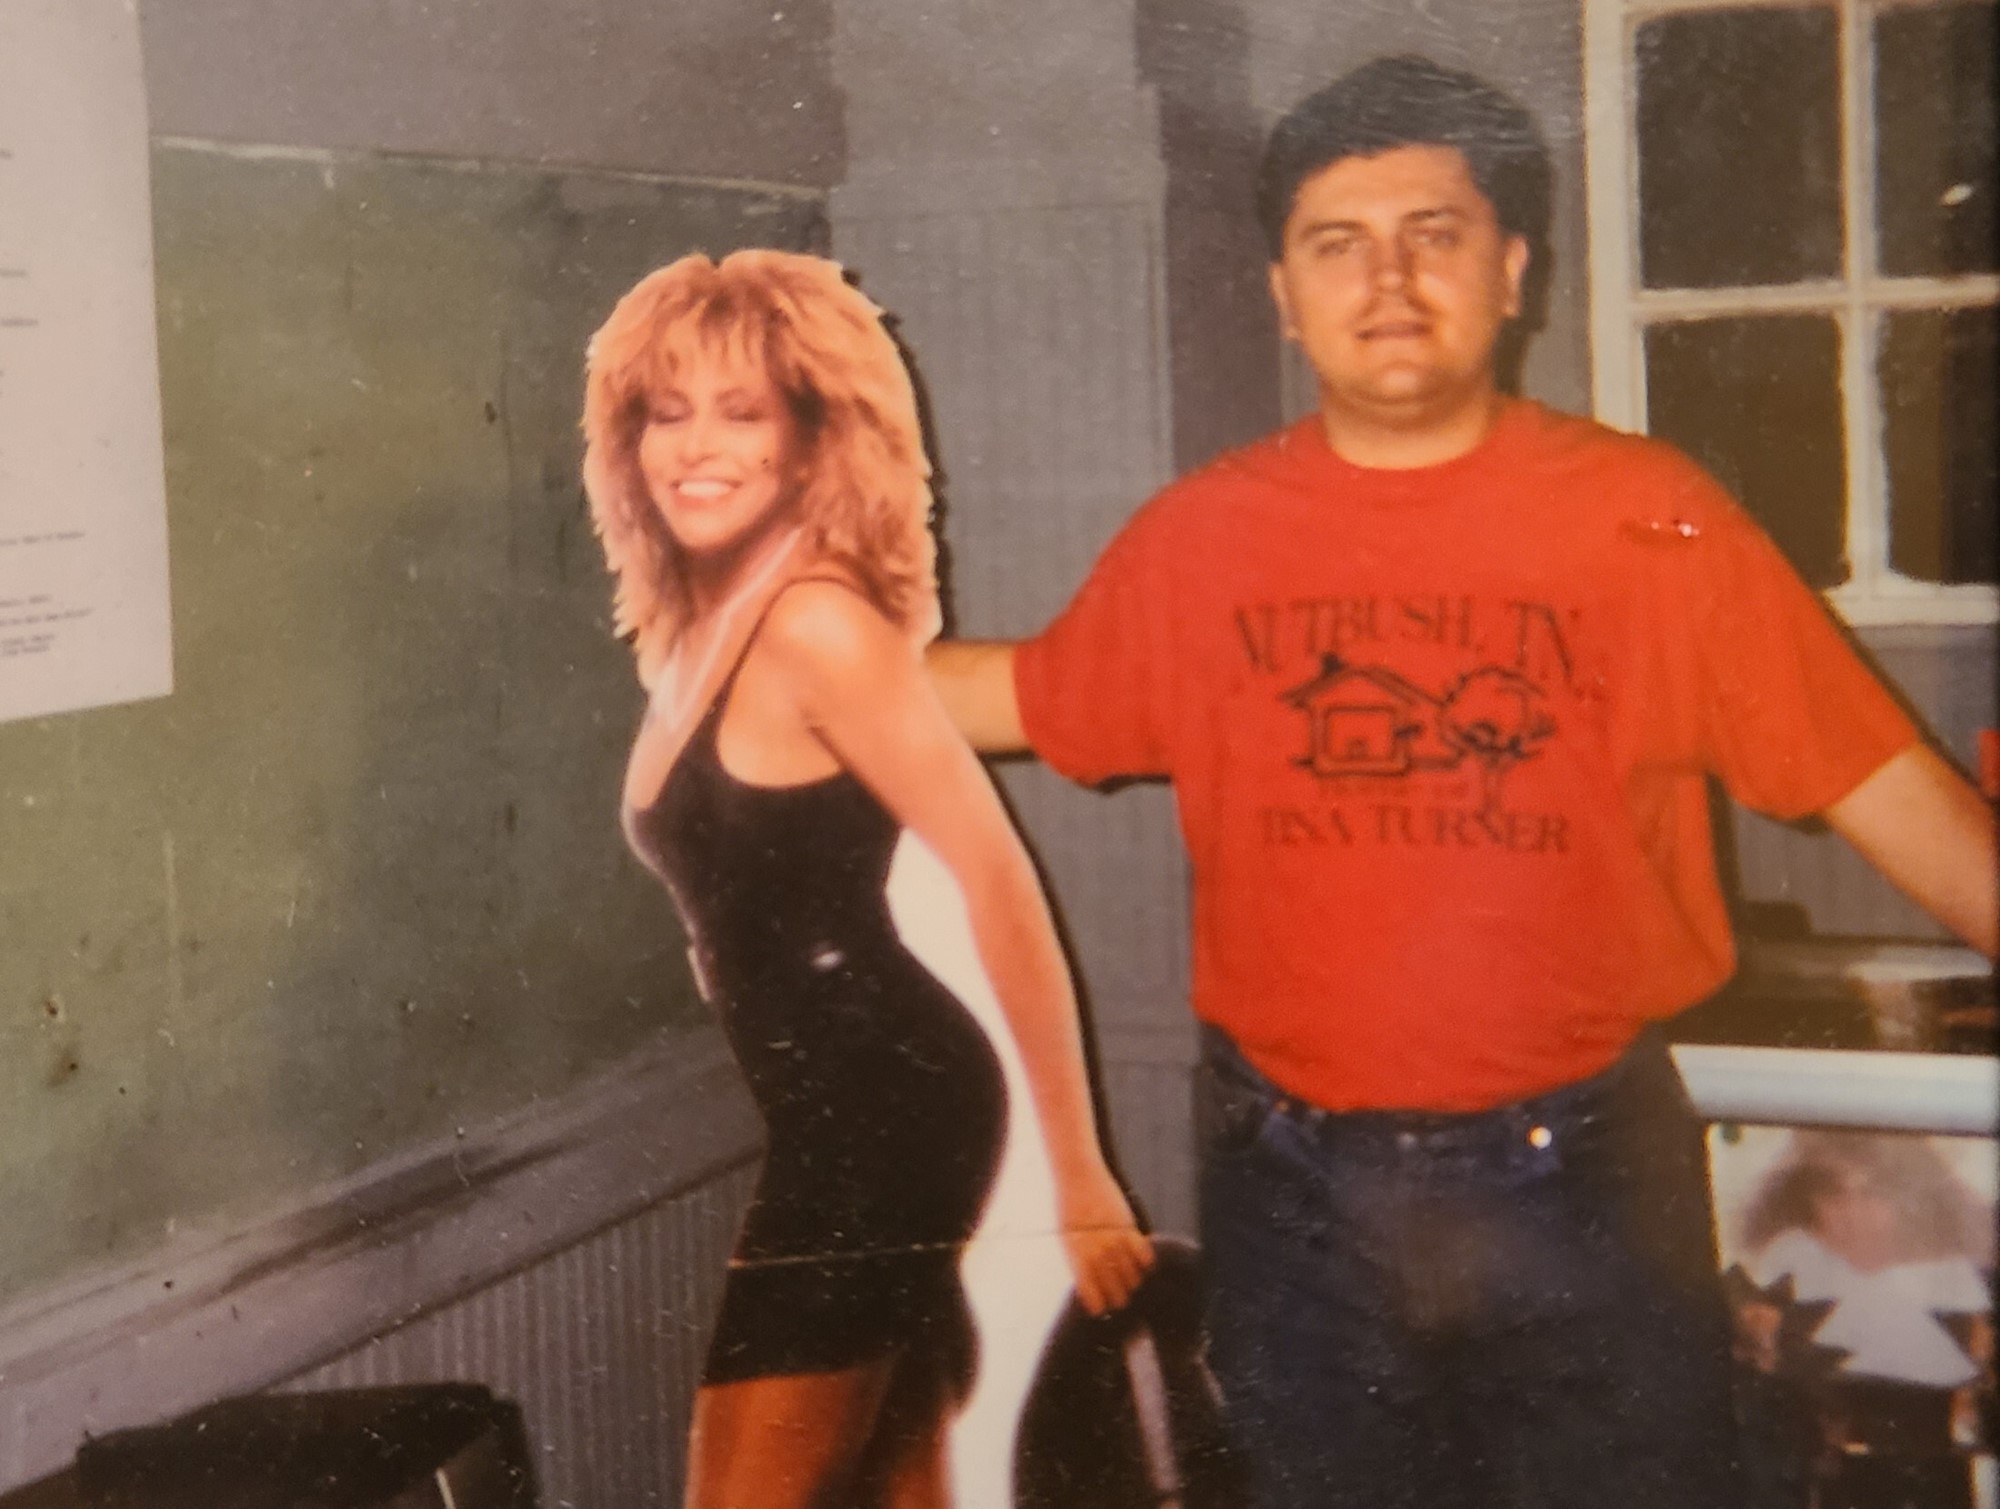 A man wearing a red tshirt poses next to a cardboard cutout of Tina Turner.